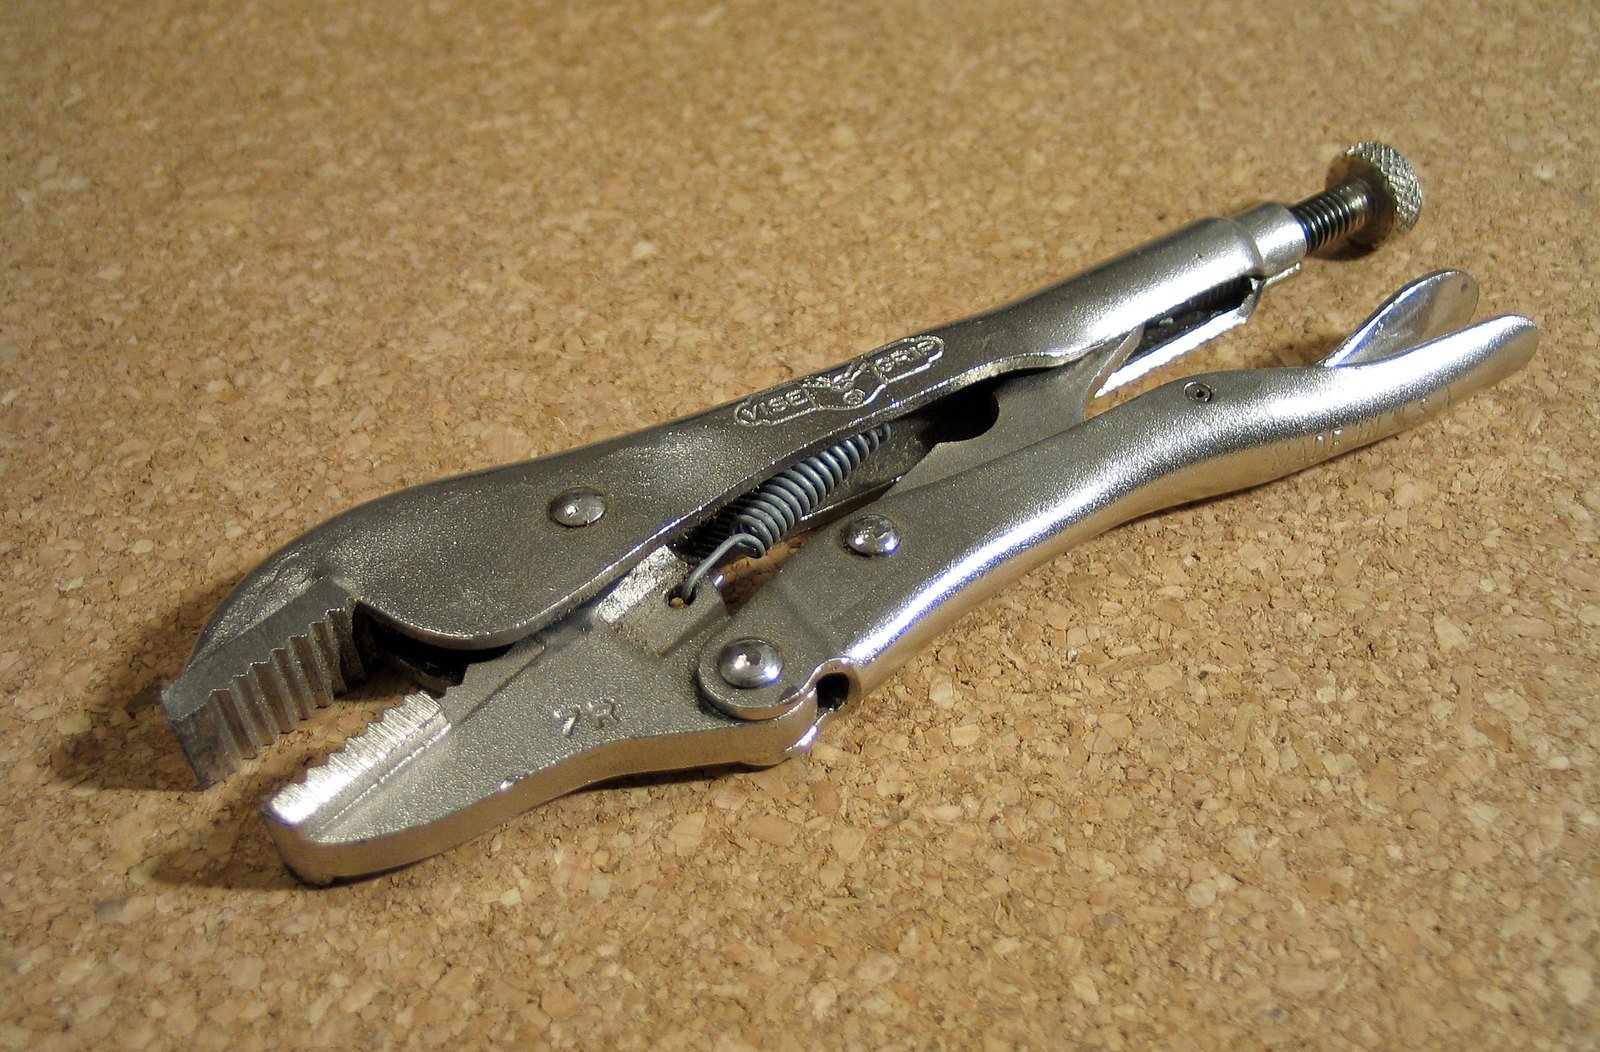 a metal pair of pliers with holes cut in half